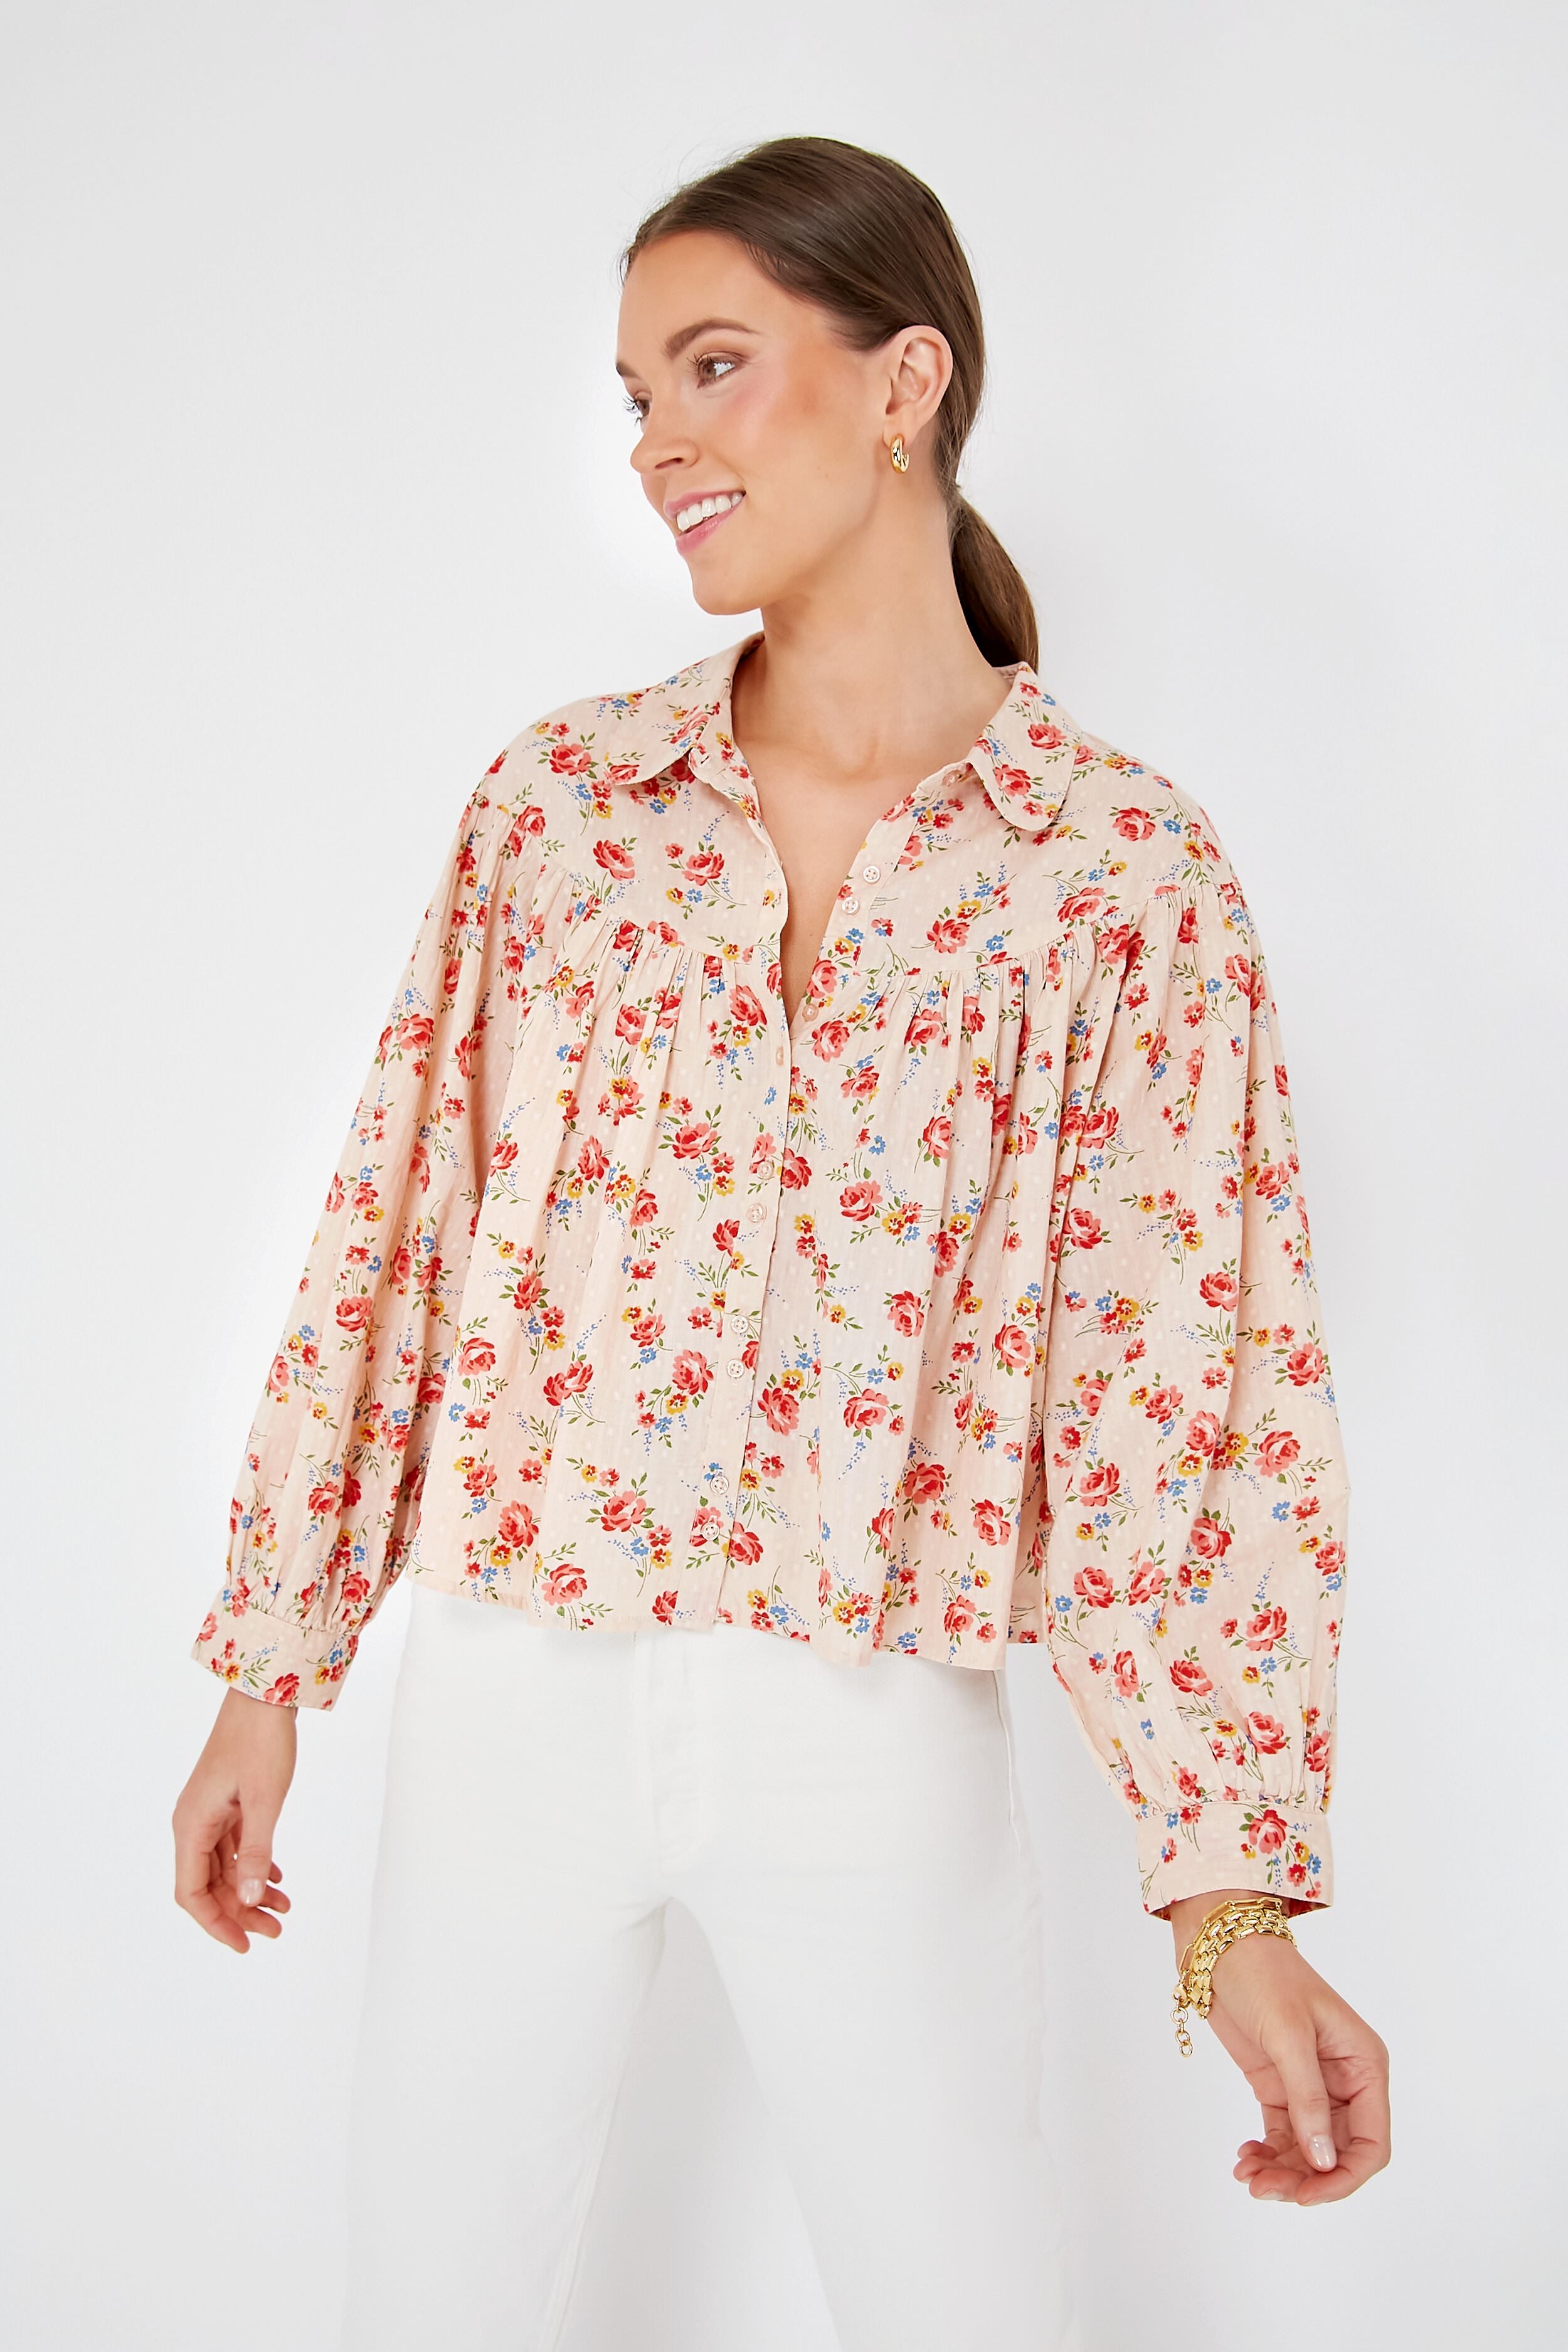 Pale Pink Kerchief Rose Print The Carousel Top | THE GREAT.